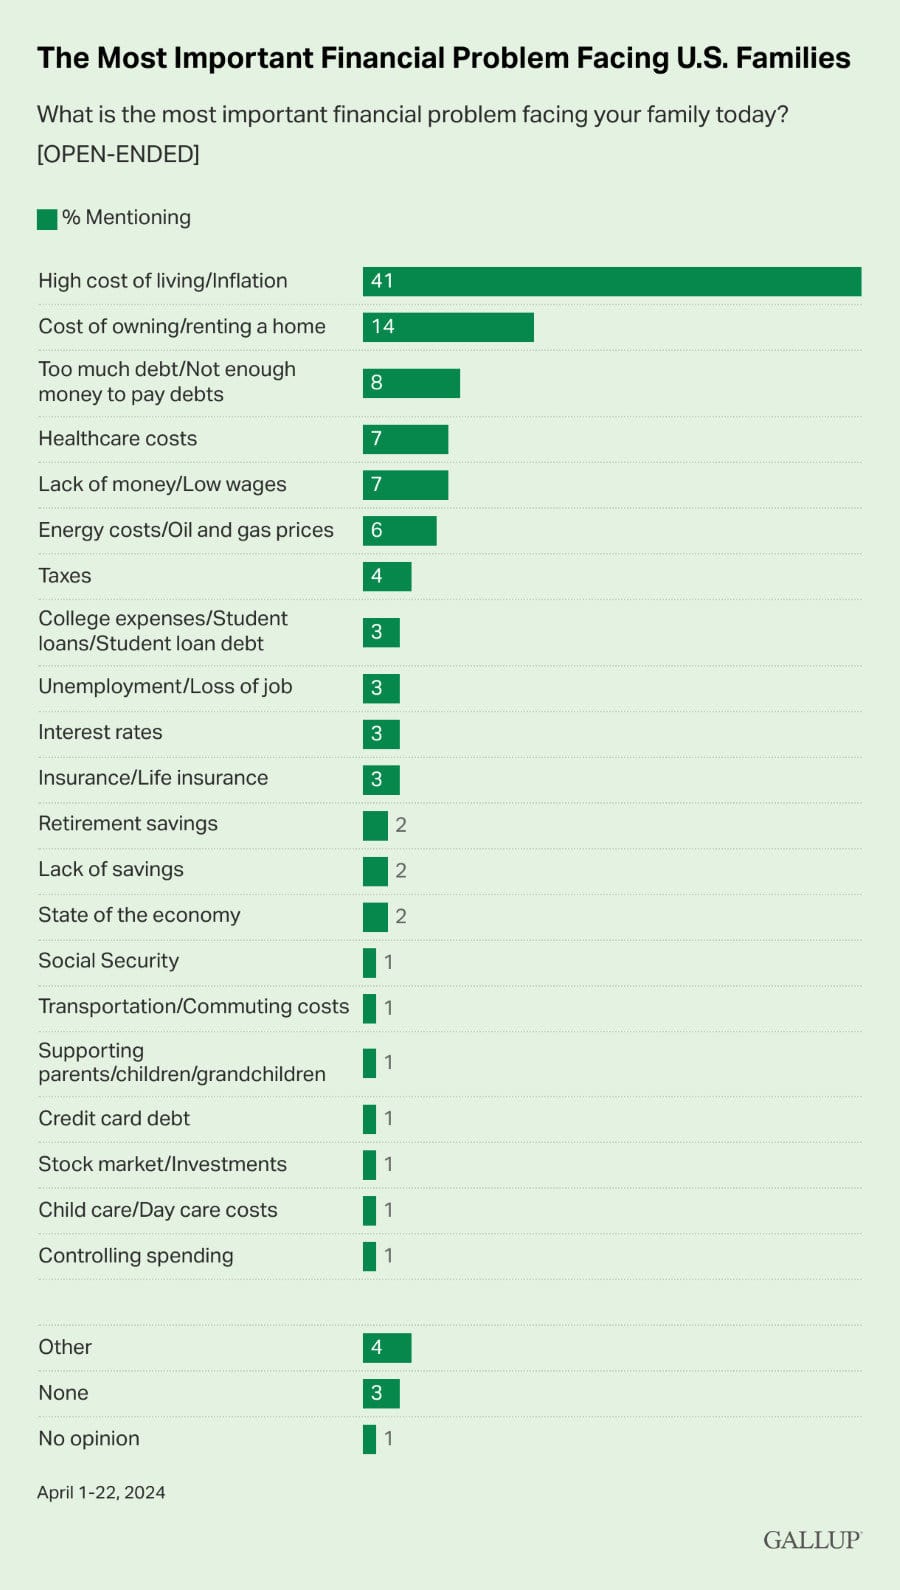 the-most-important-financial-problem-facing-u.s.-families Photo by Gallup